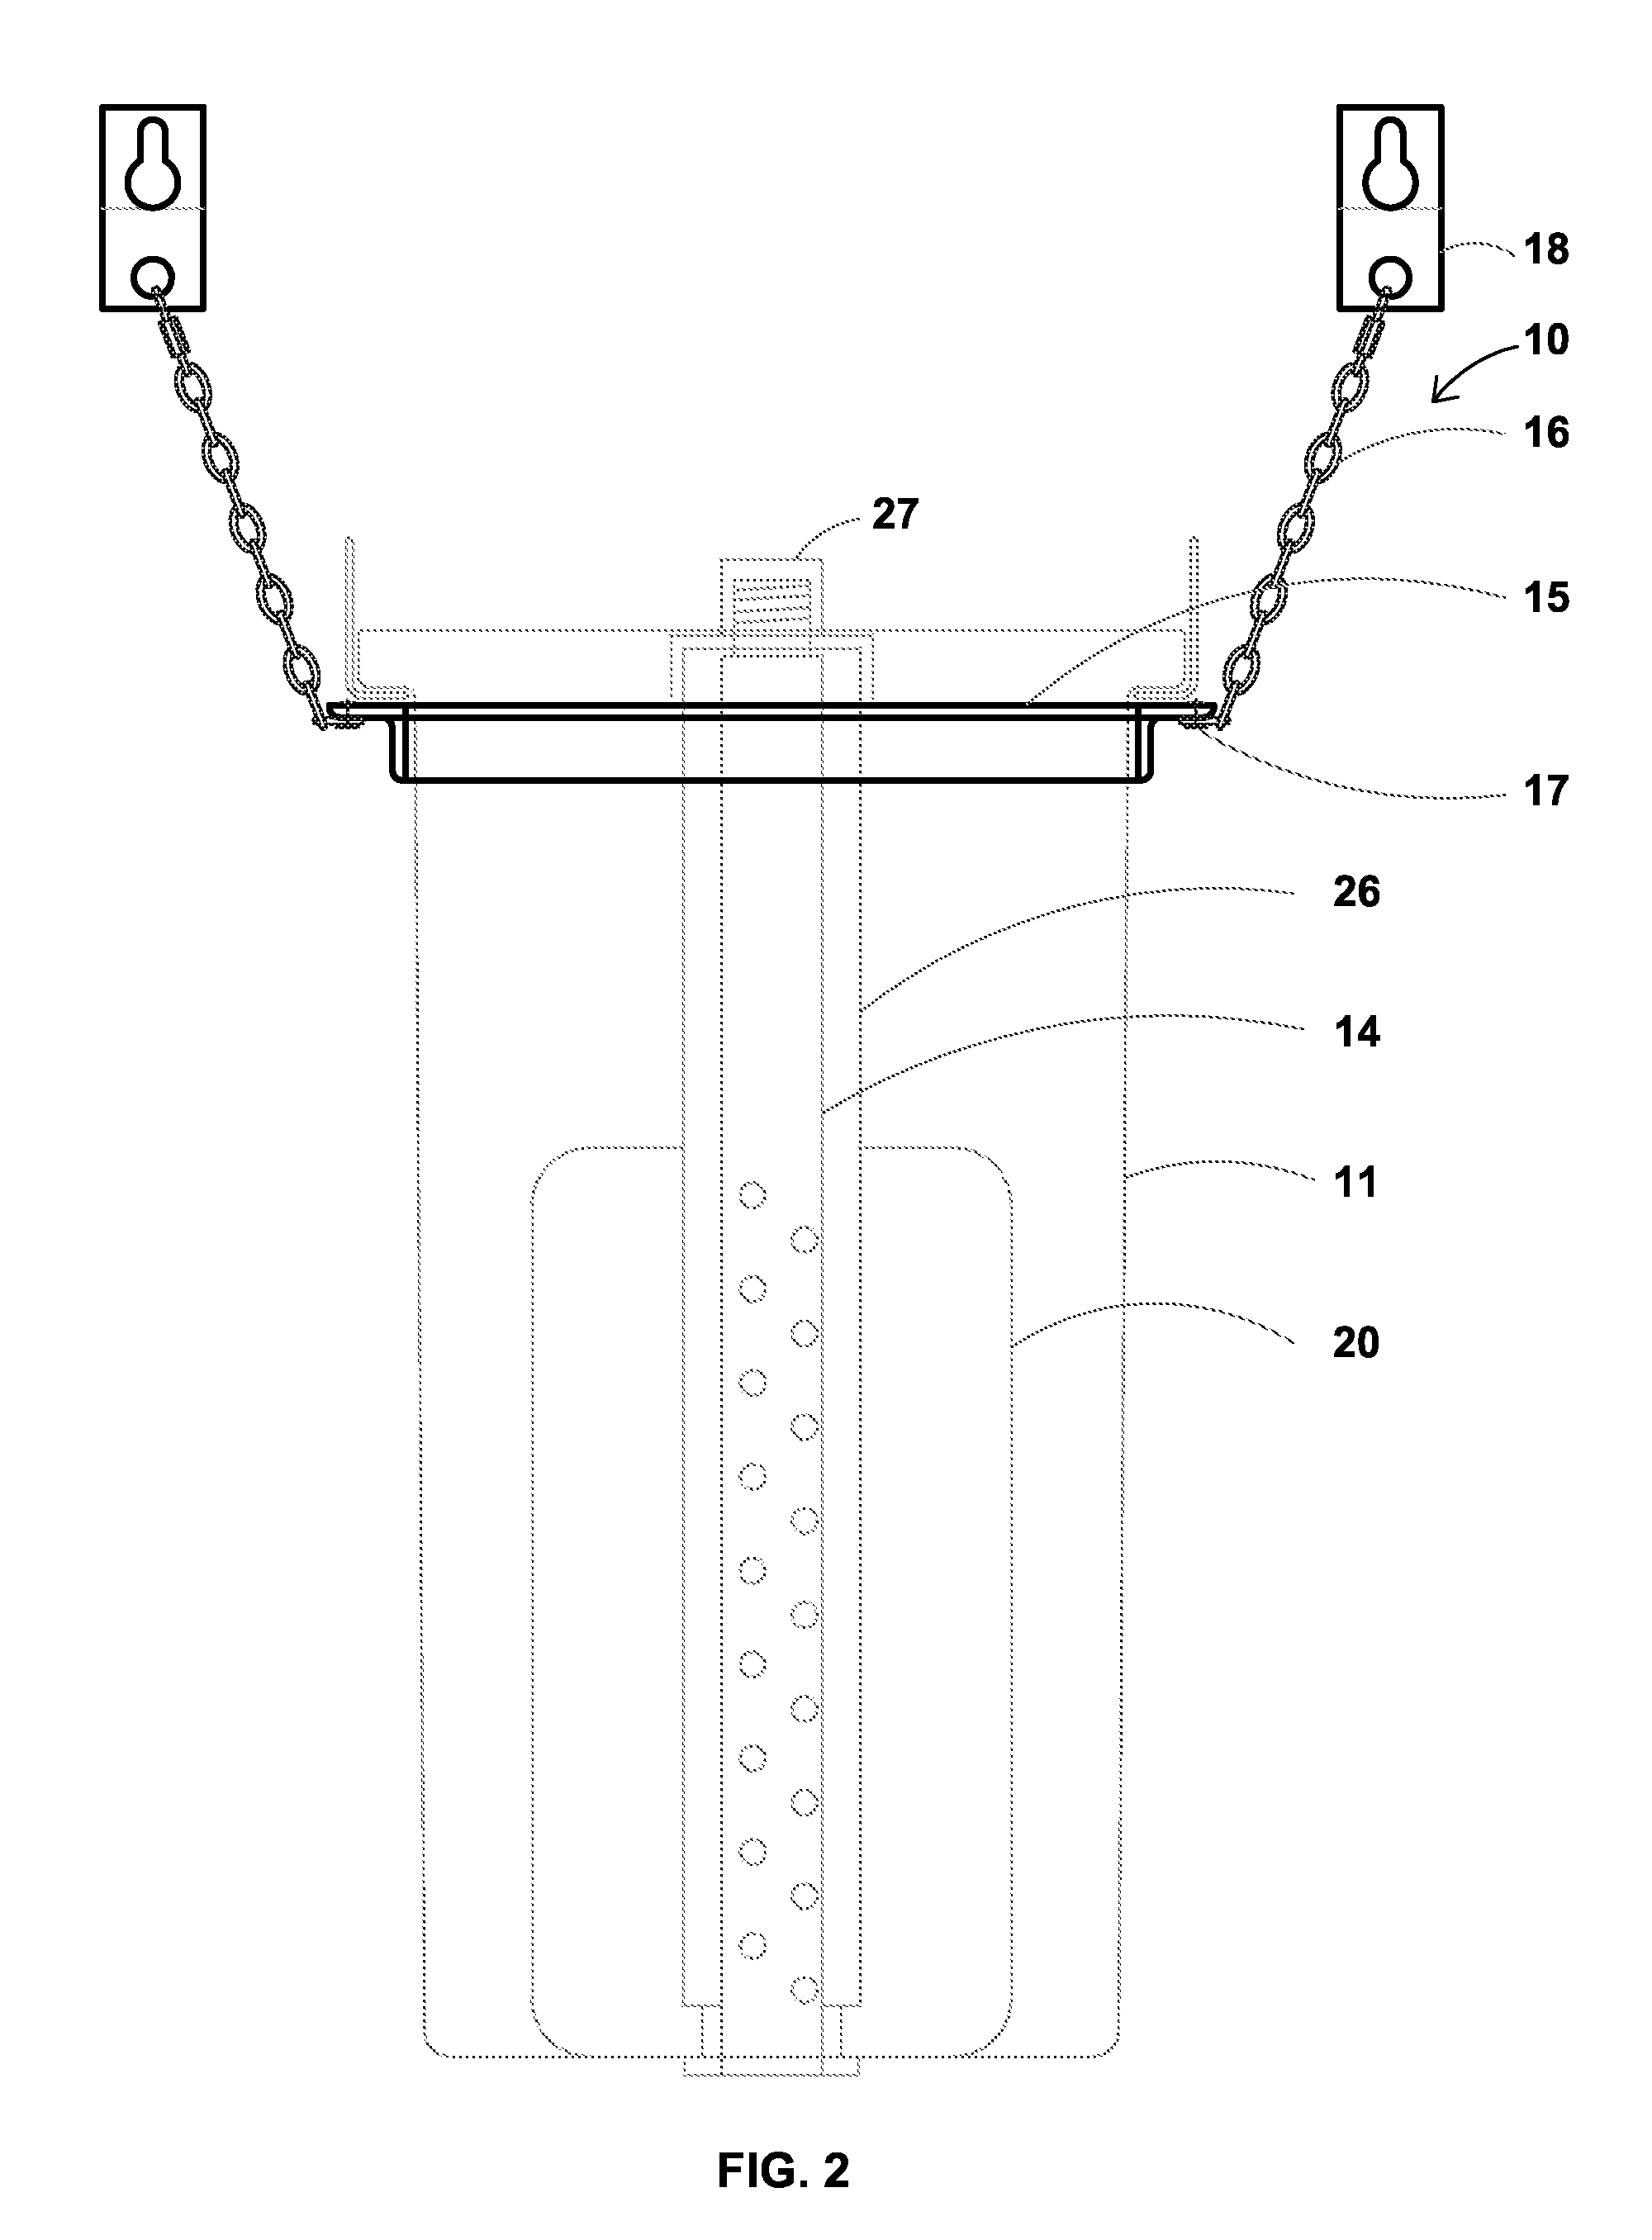 Catch basin filter absorber apparatus and method for water decontamination